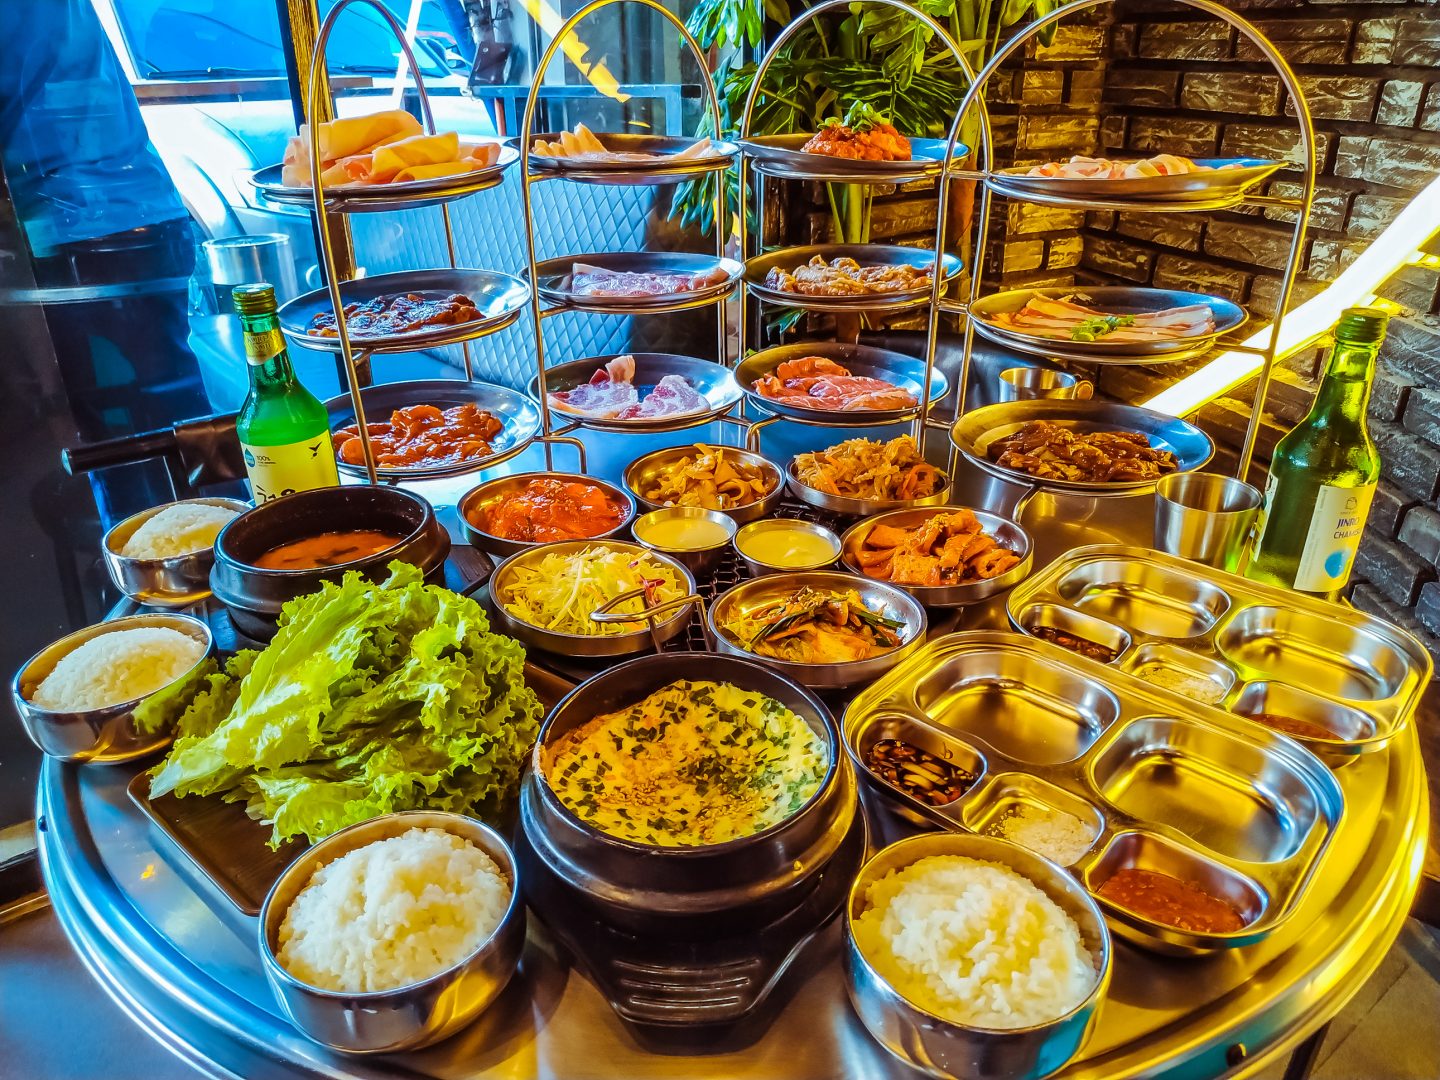 Fantastic Chef: Unlimited Cheesy Korean BBQ in Malate for P499!